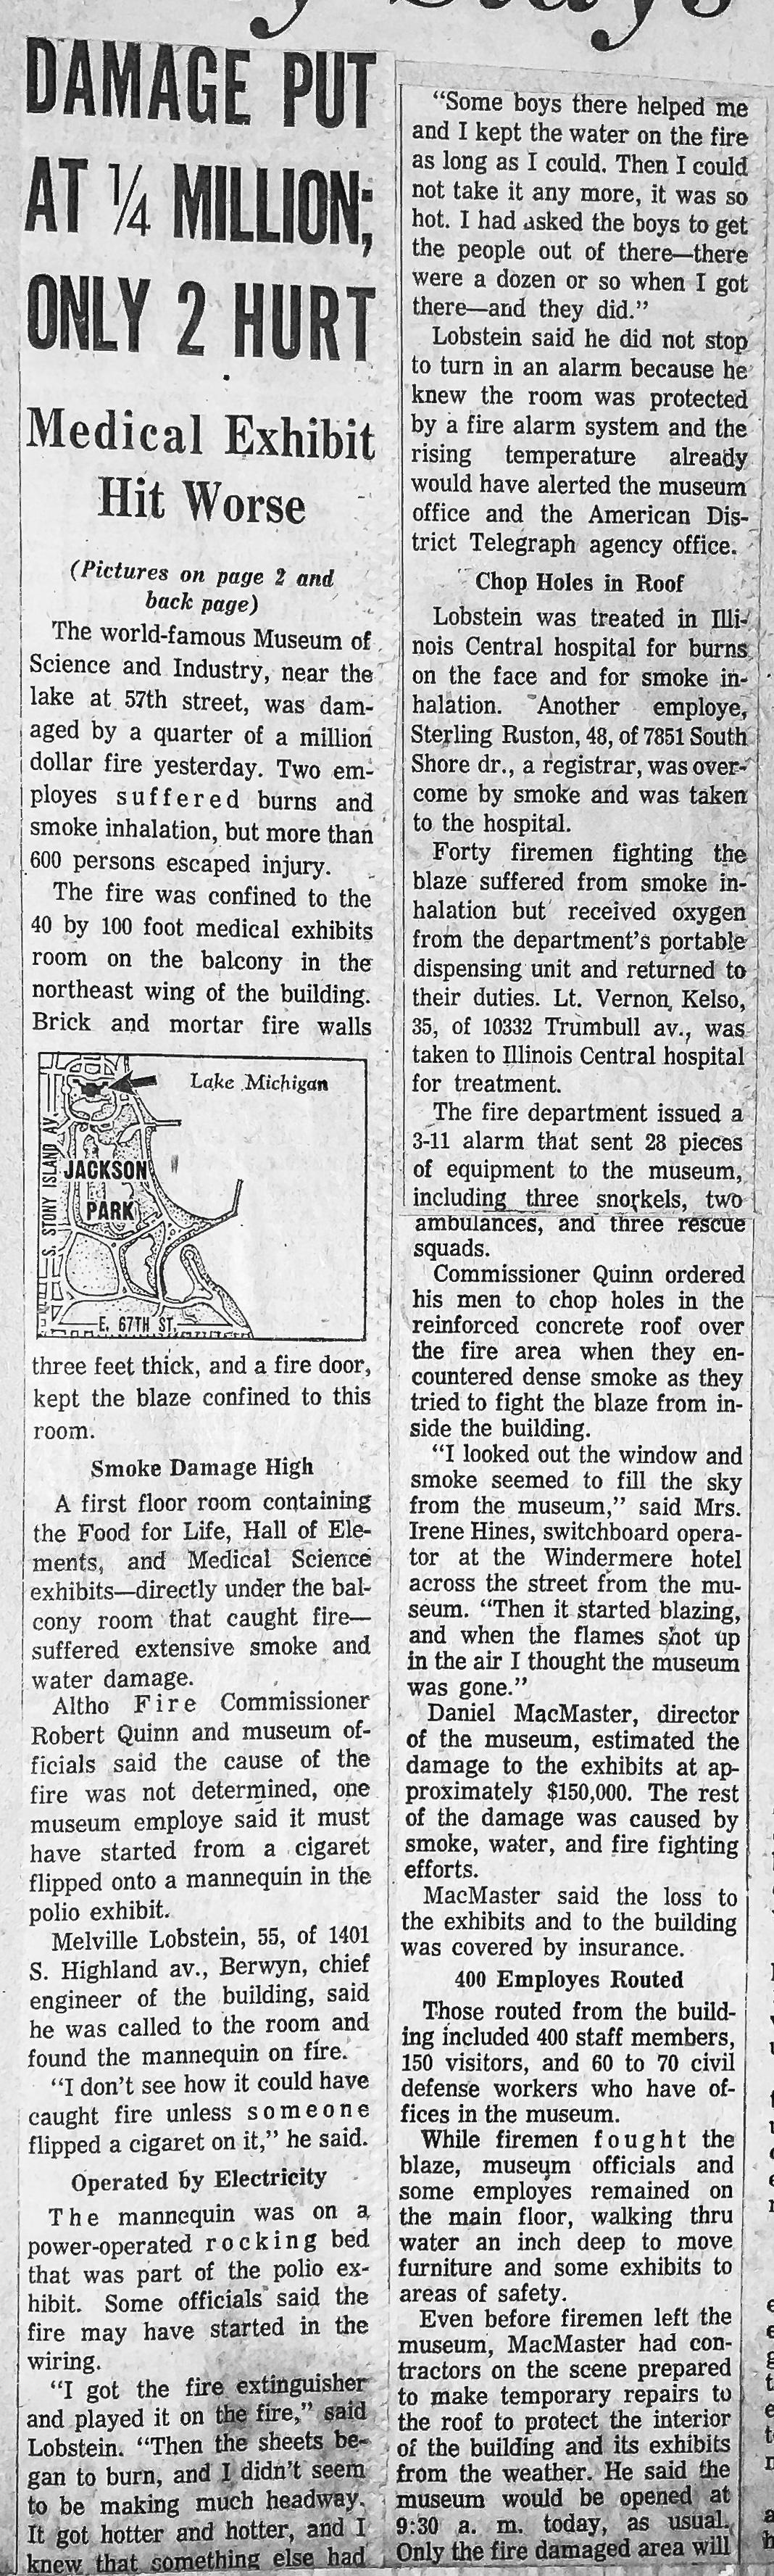 vintage news clipping of Chicago Fire Department history, a 3-11 Alarm fire at the Museum of Science and Industry in 1963